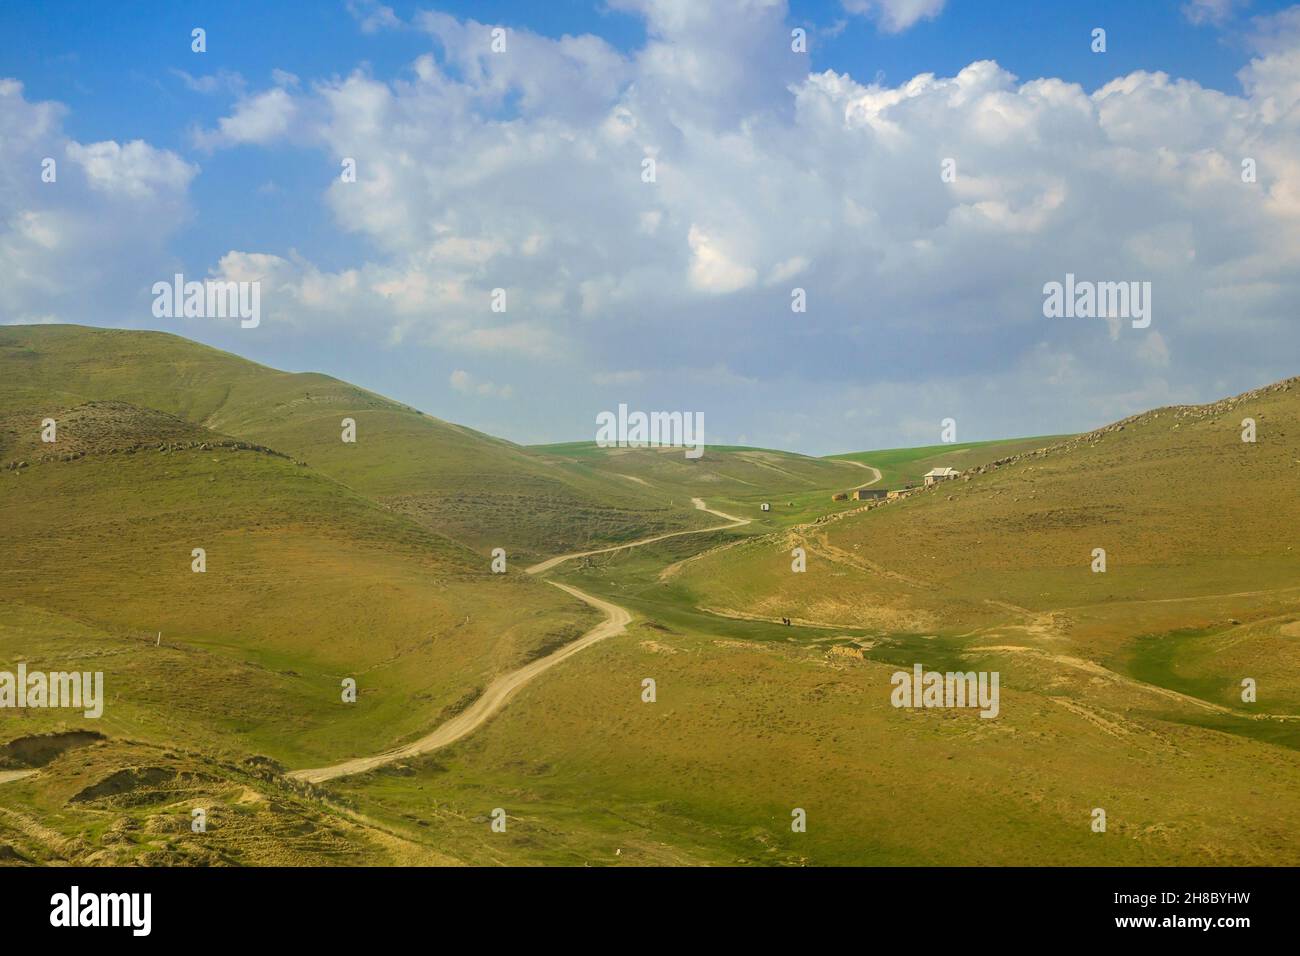 Country road winding between hills of valley. Village houses and small figures of residents are visible near hill on right side. Shot in Qashqadaryo r Stock Photo